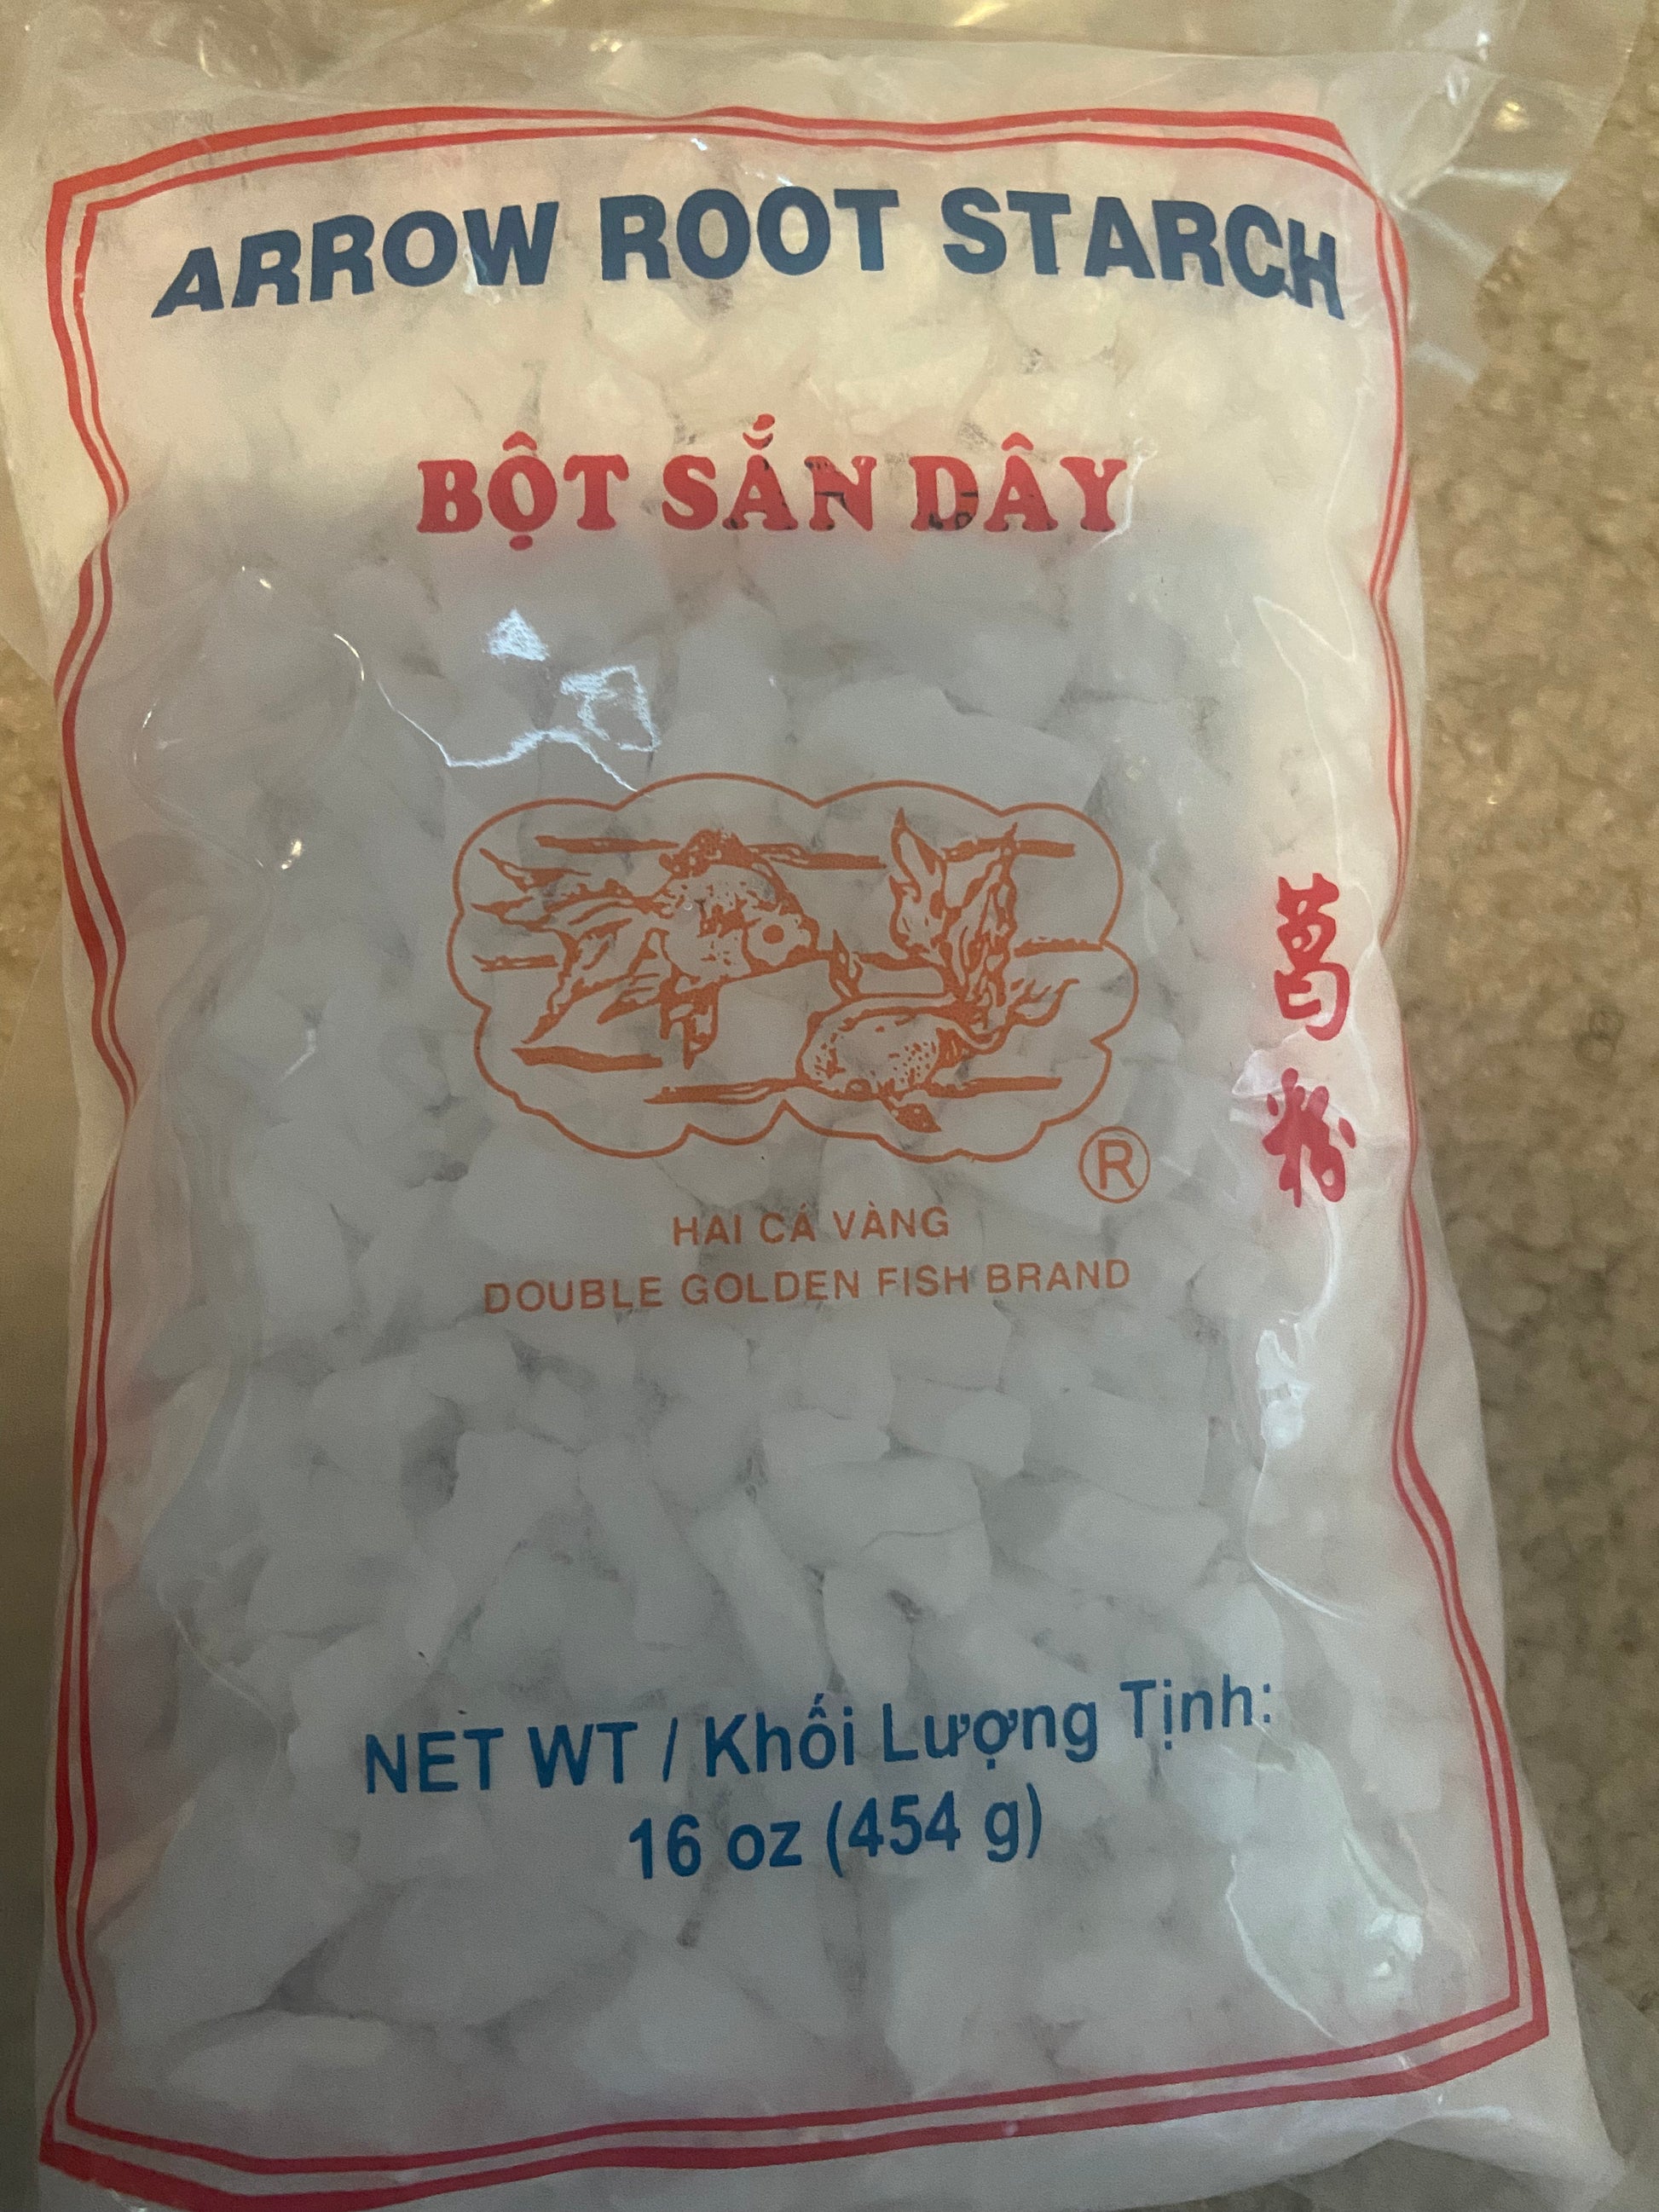 Arrow Root Starch (Bot San Day) – Starch District